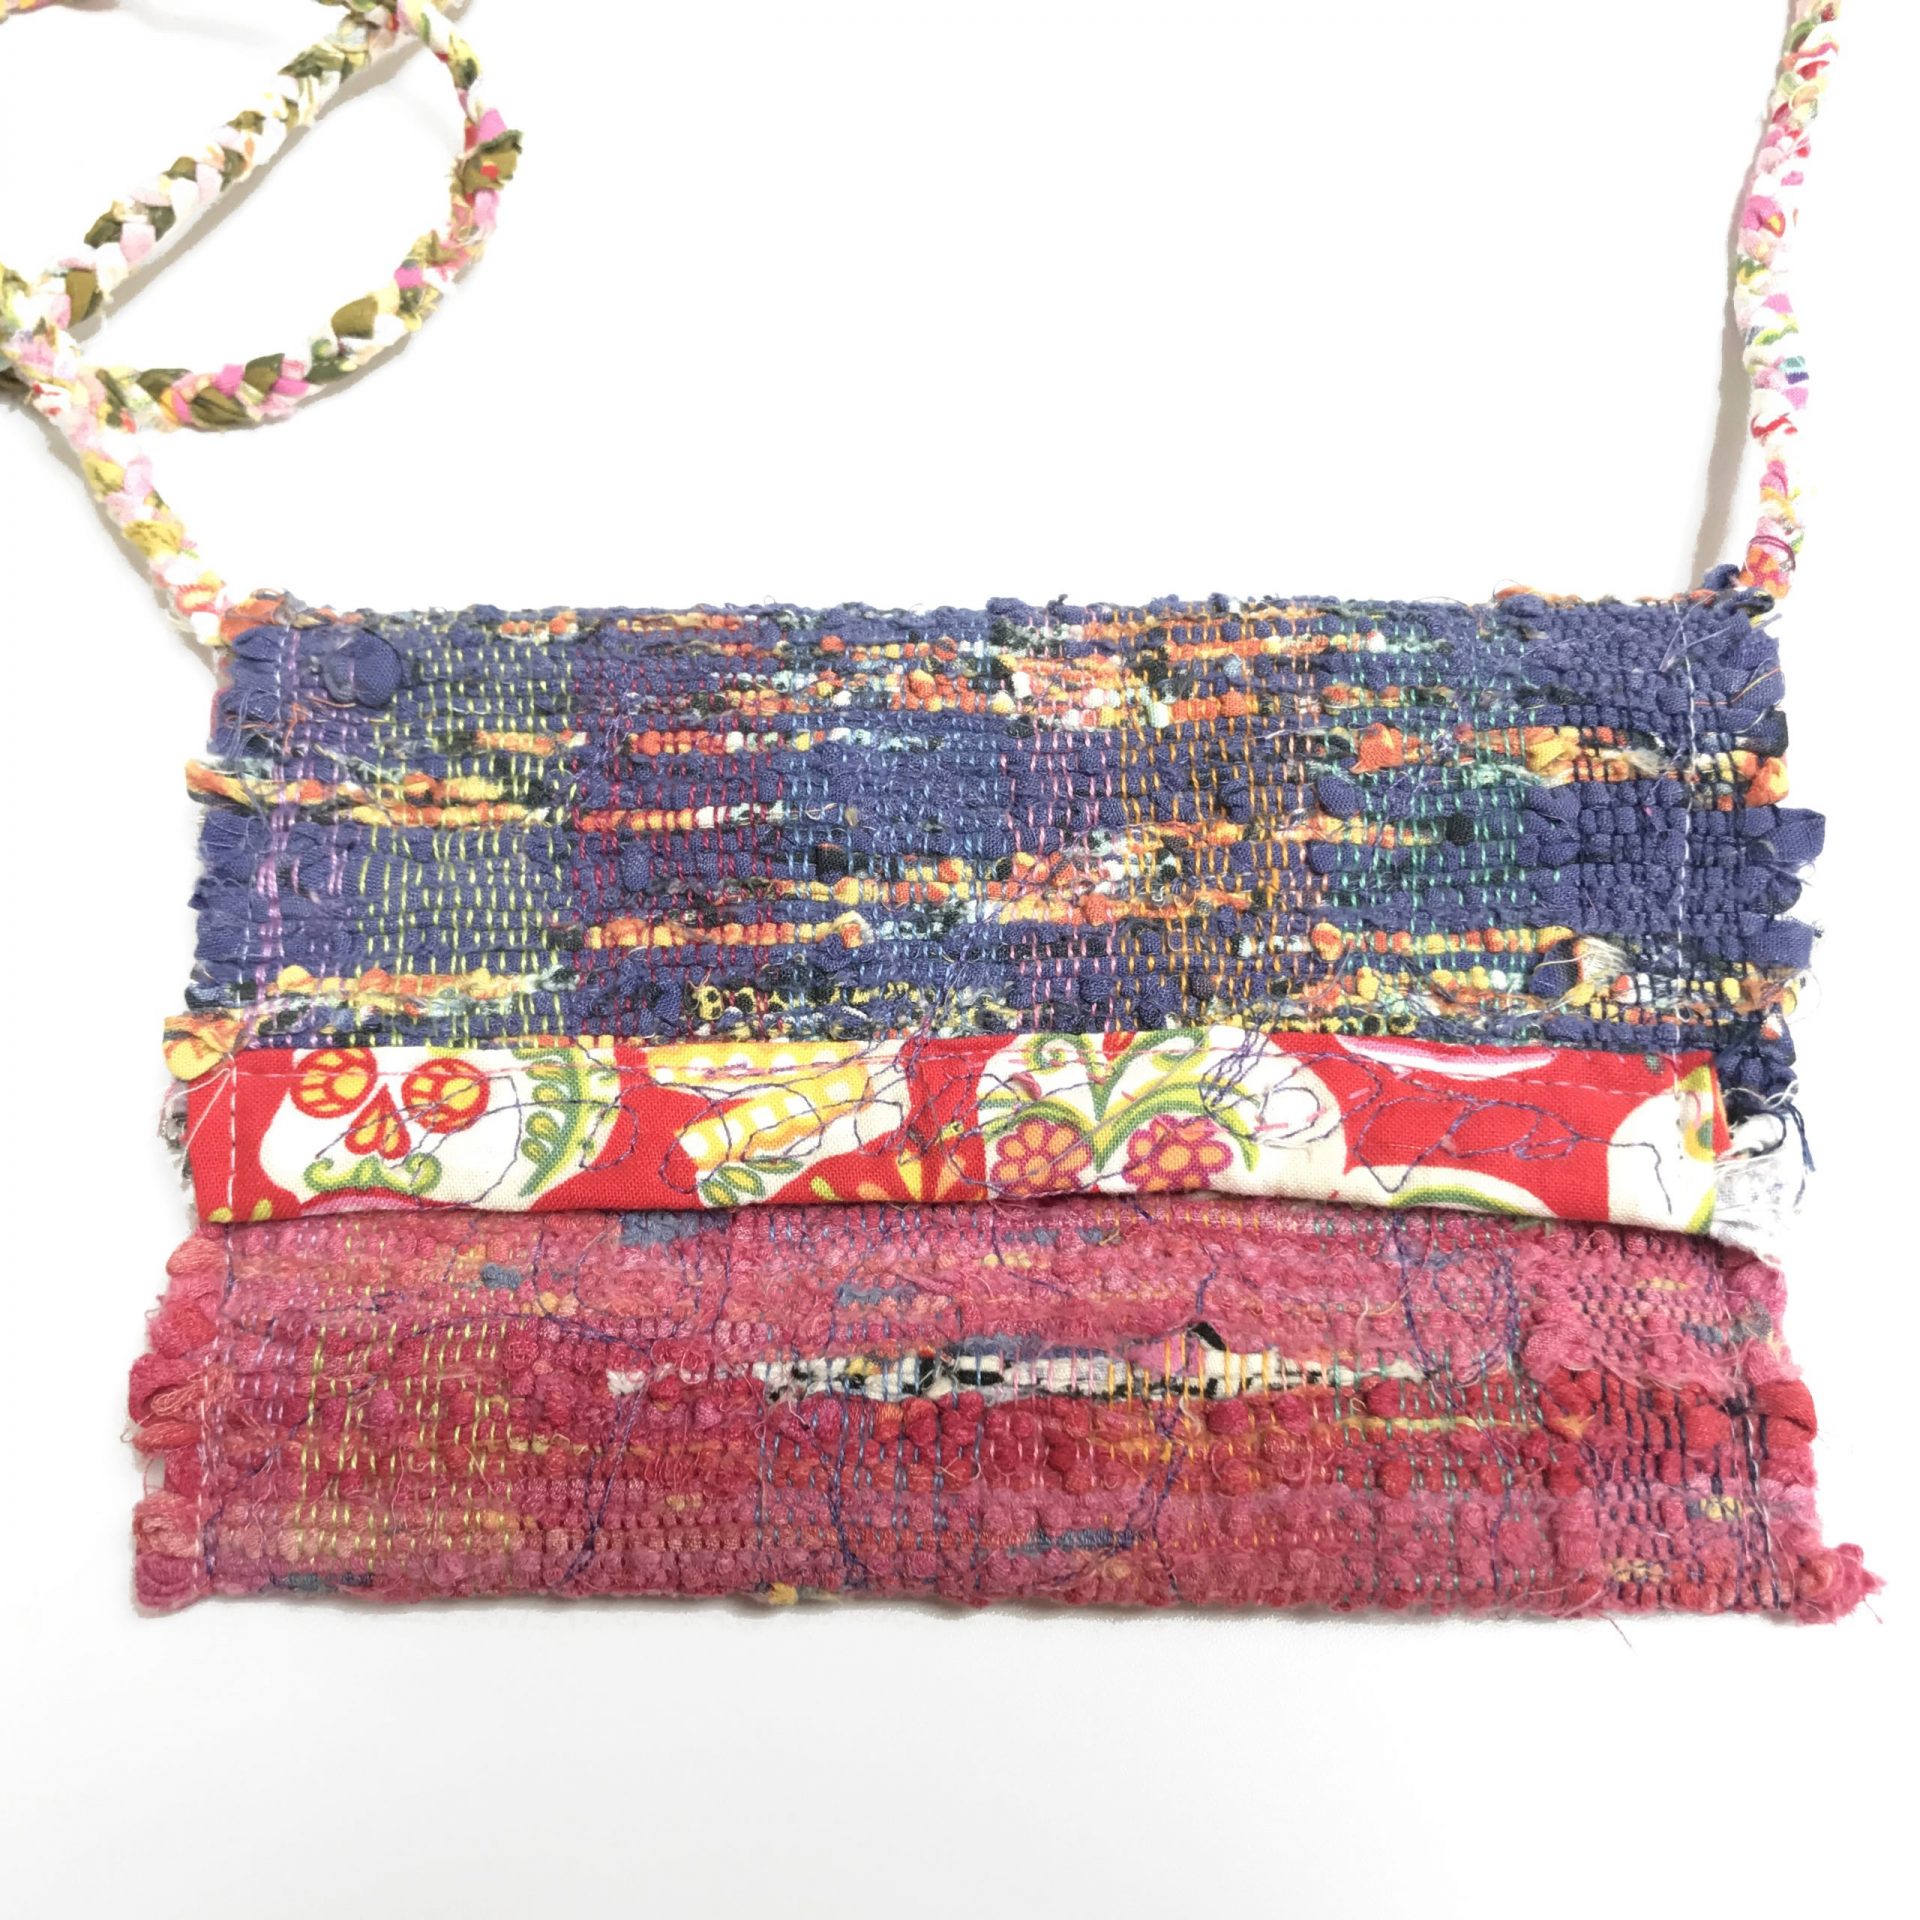 Woven Rag Bag with Strap | Freehand Gallery